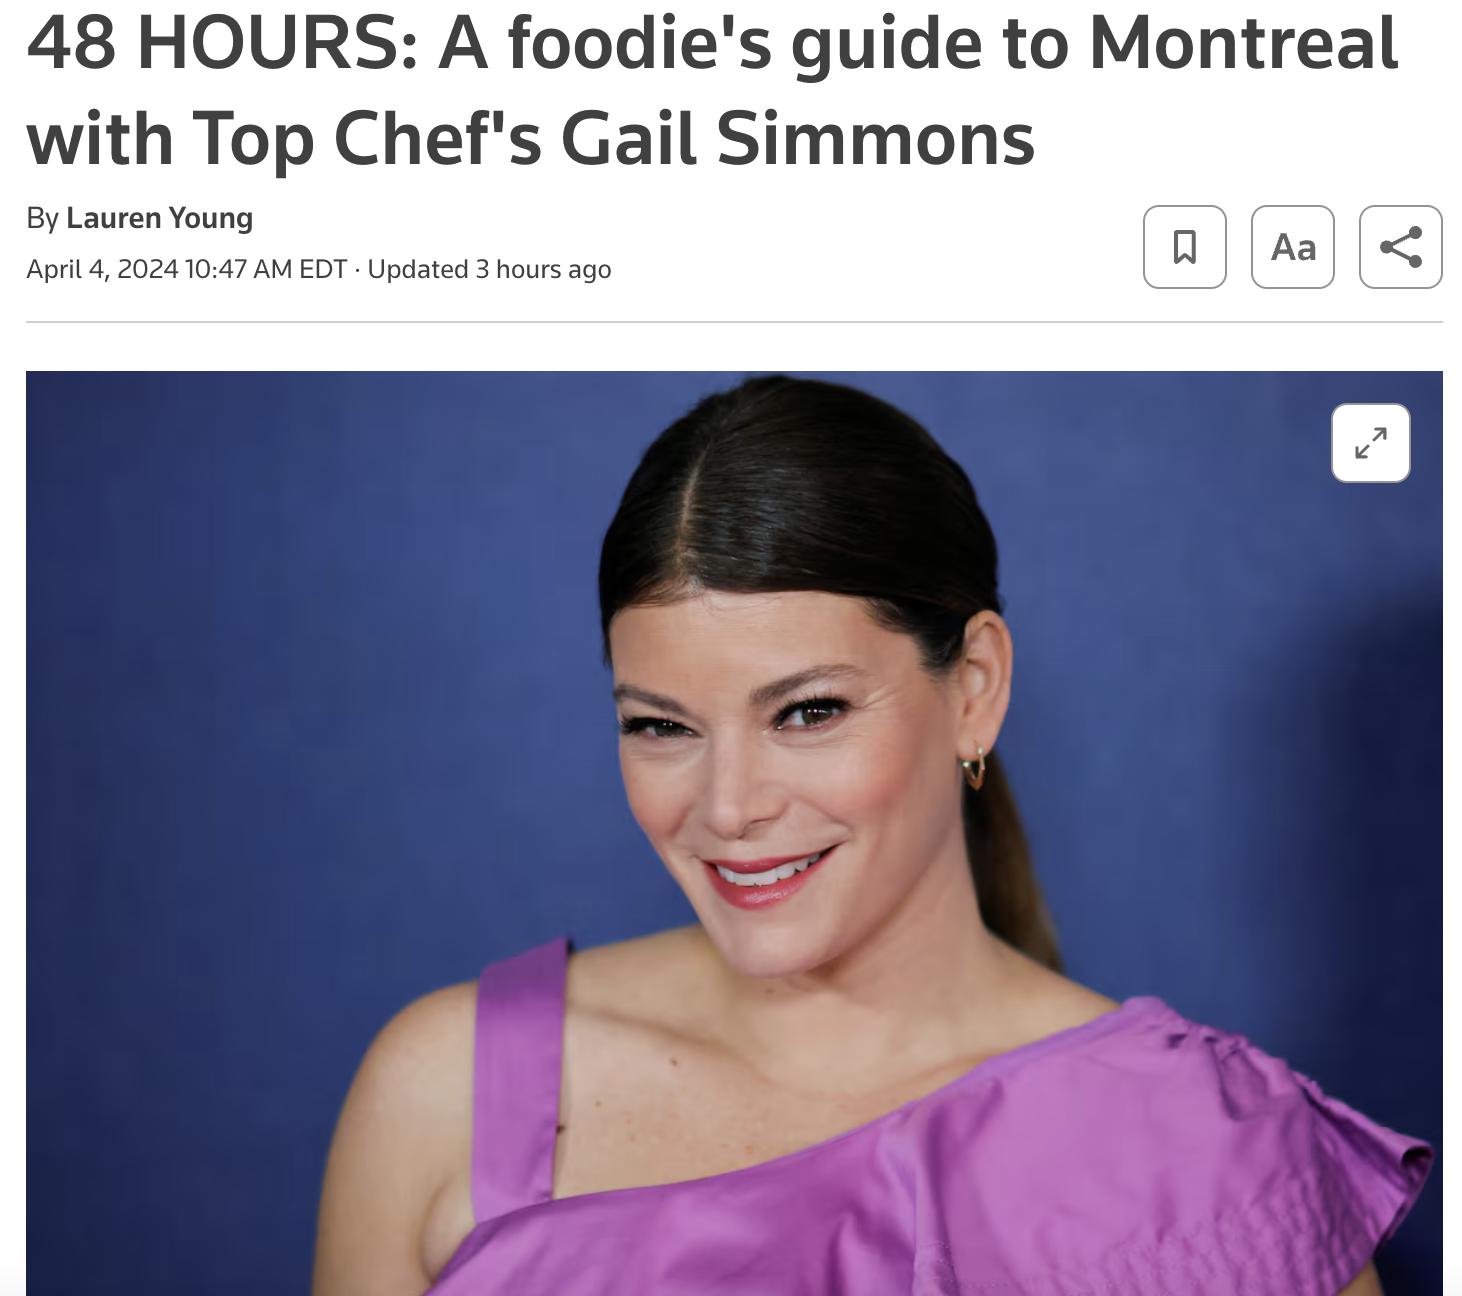 48 HOURS: A foodie's guide to Montreal with Top Chef's Gail Simmons